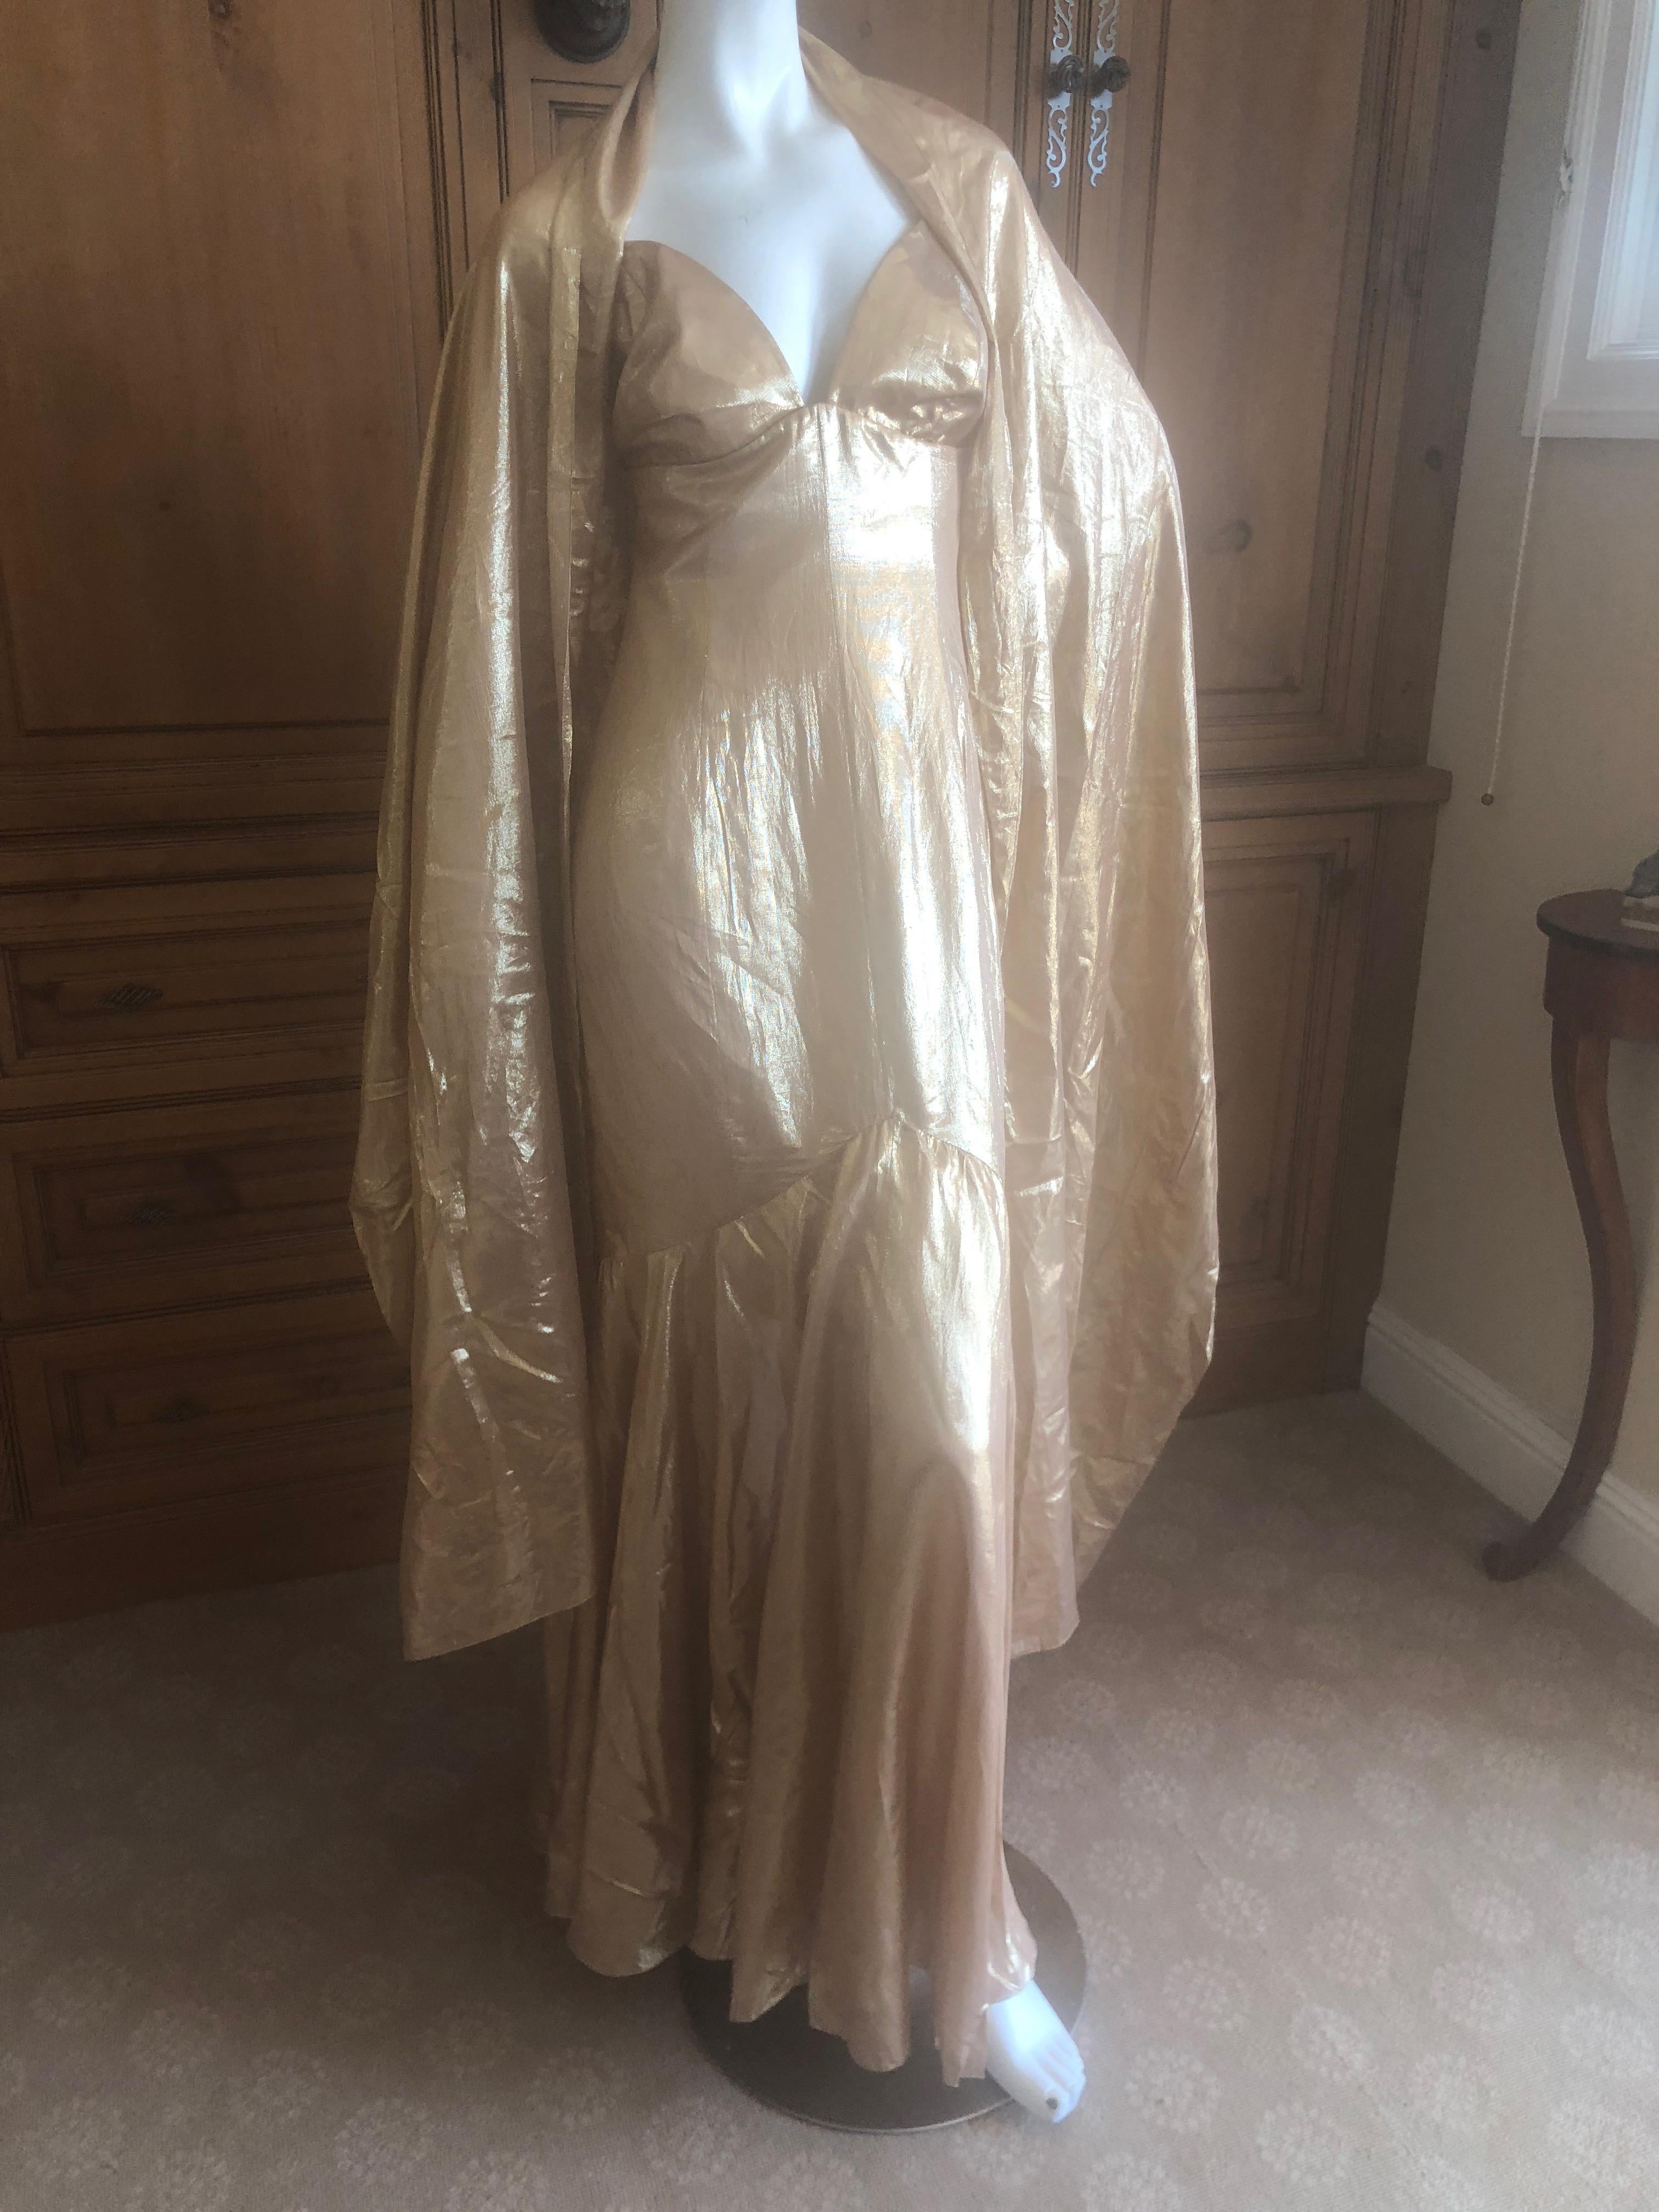 Jacques Fath Vintage Golden Halter Evening Dress with Shawl.
So fabulous. Gossamer thin golden silk fabric, so chic!
Simply Stunning. Please use the zoom feature to see al the details.
Size 40
Bust 34